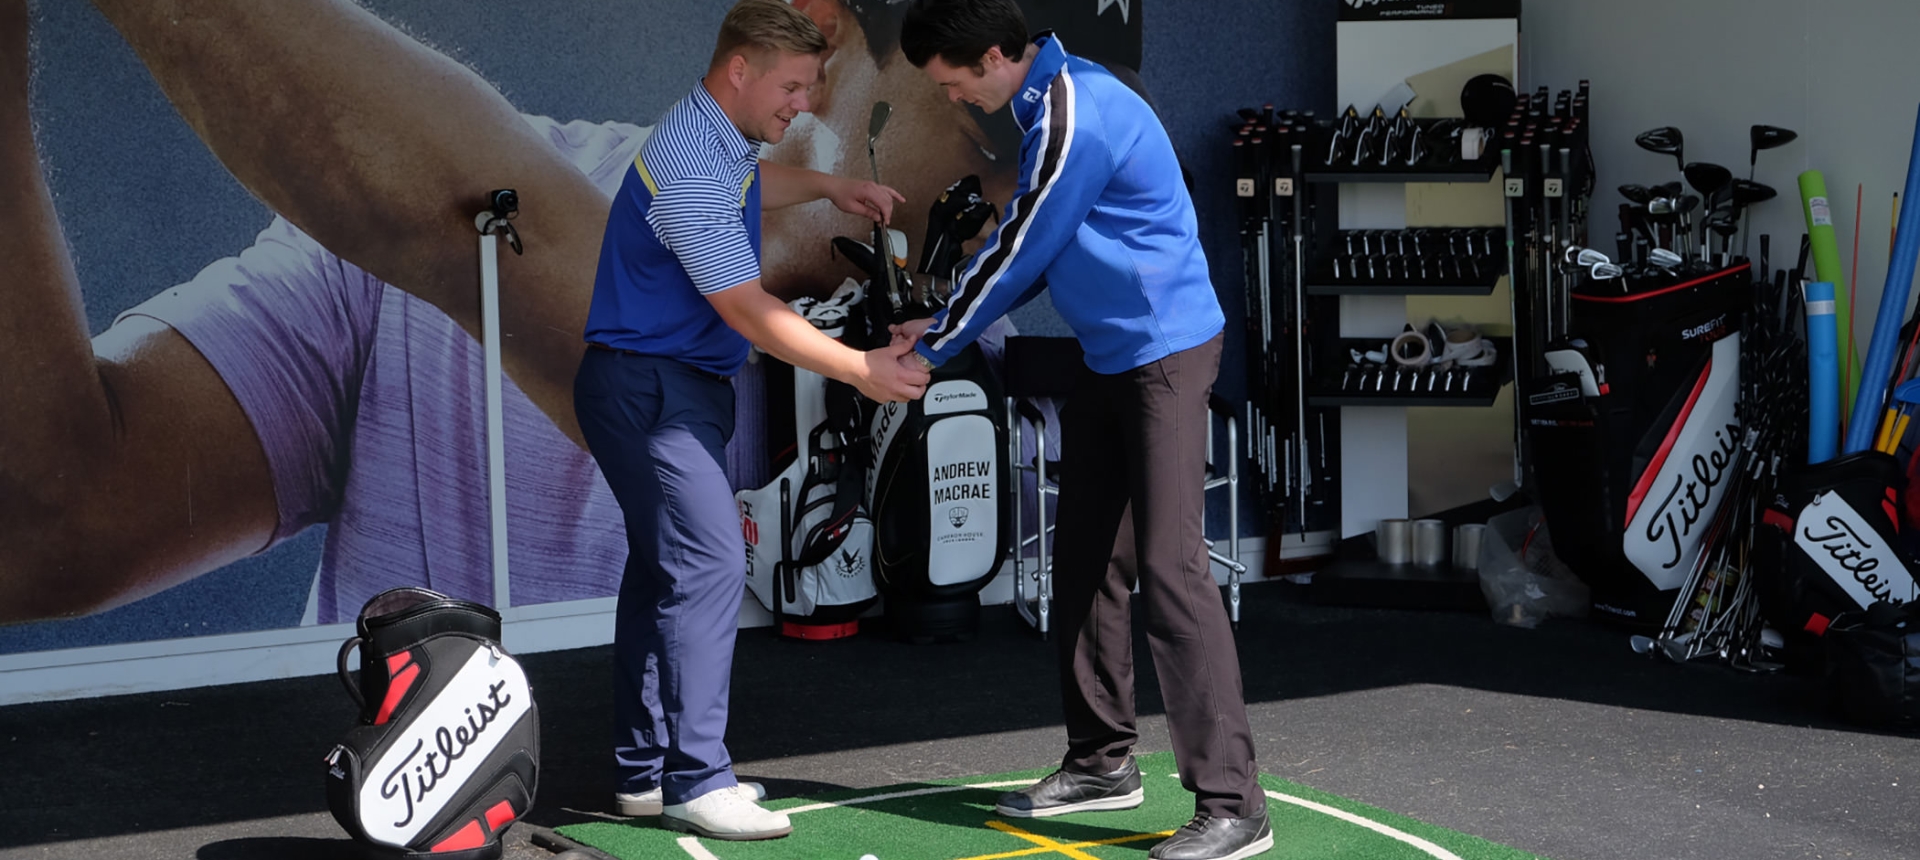 a man helping another man hold his club to practice his golf swing